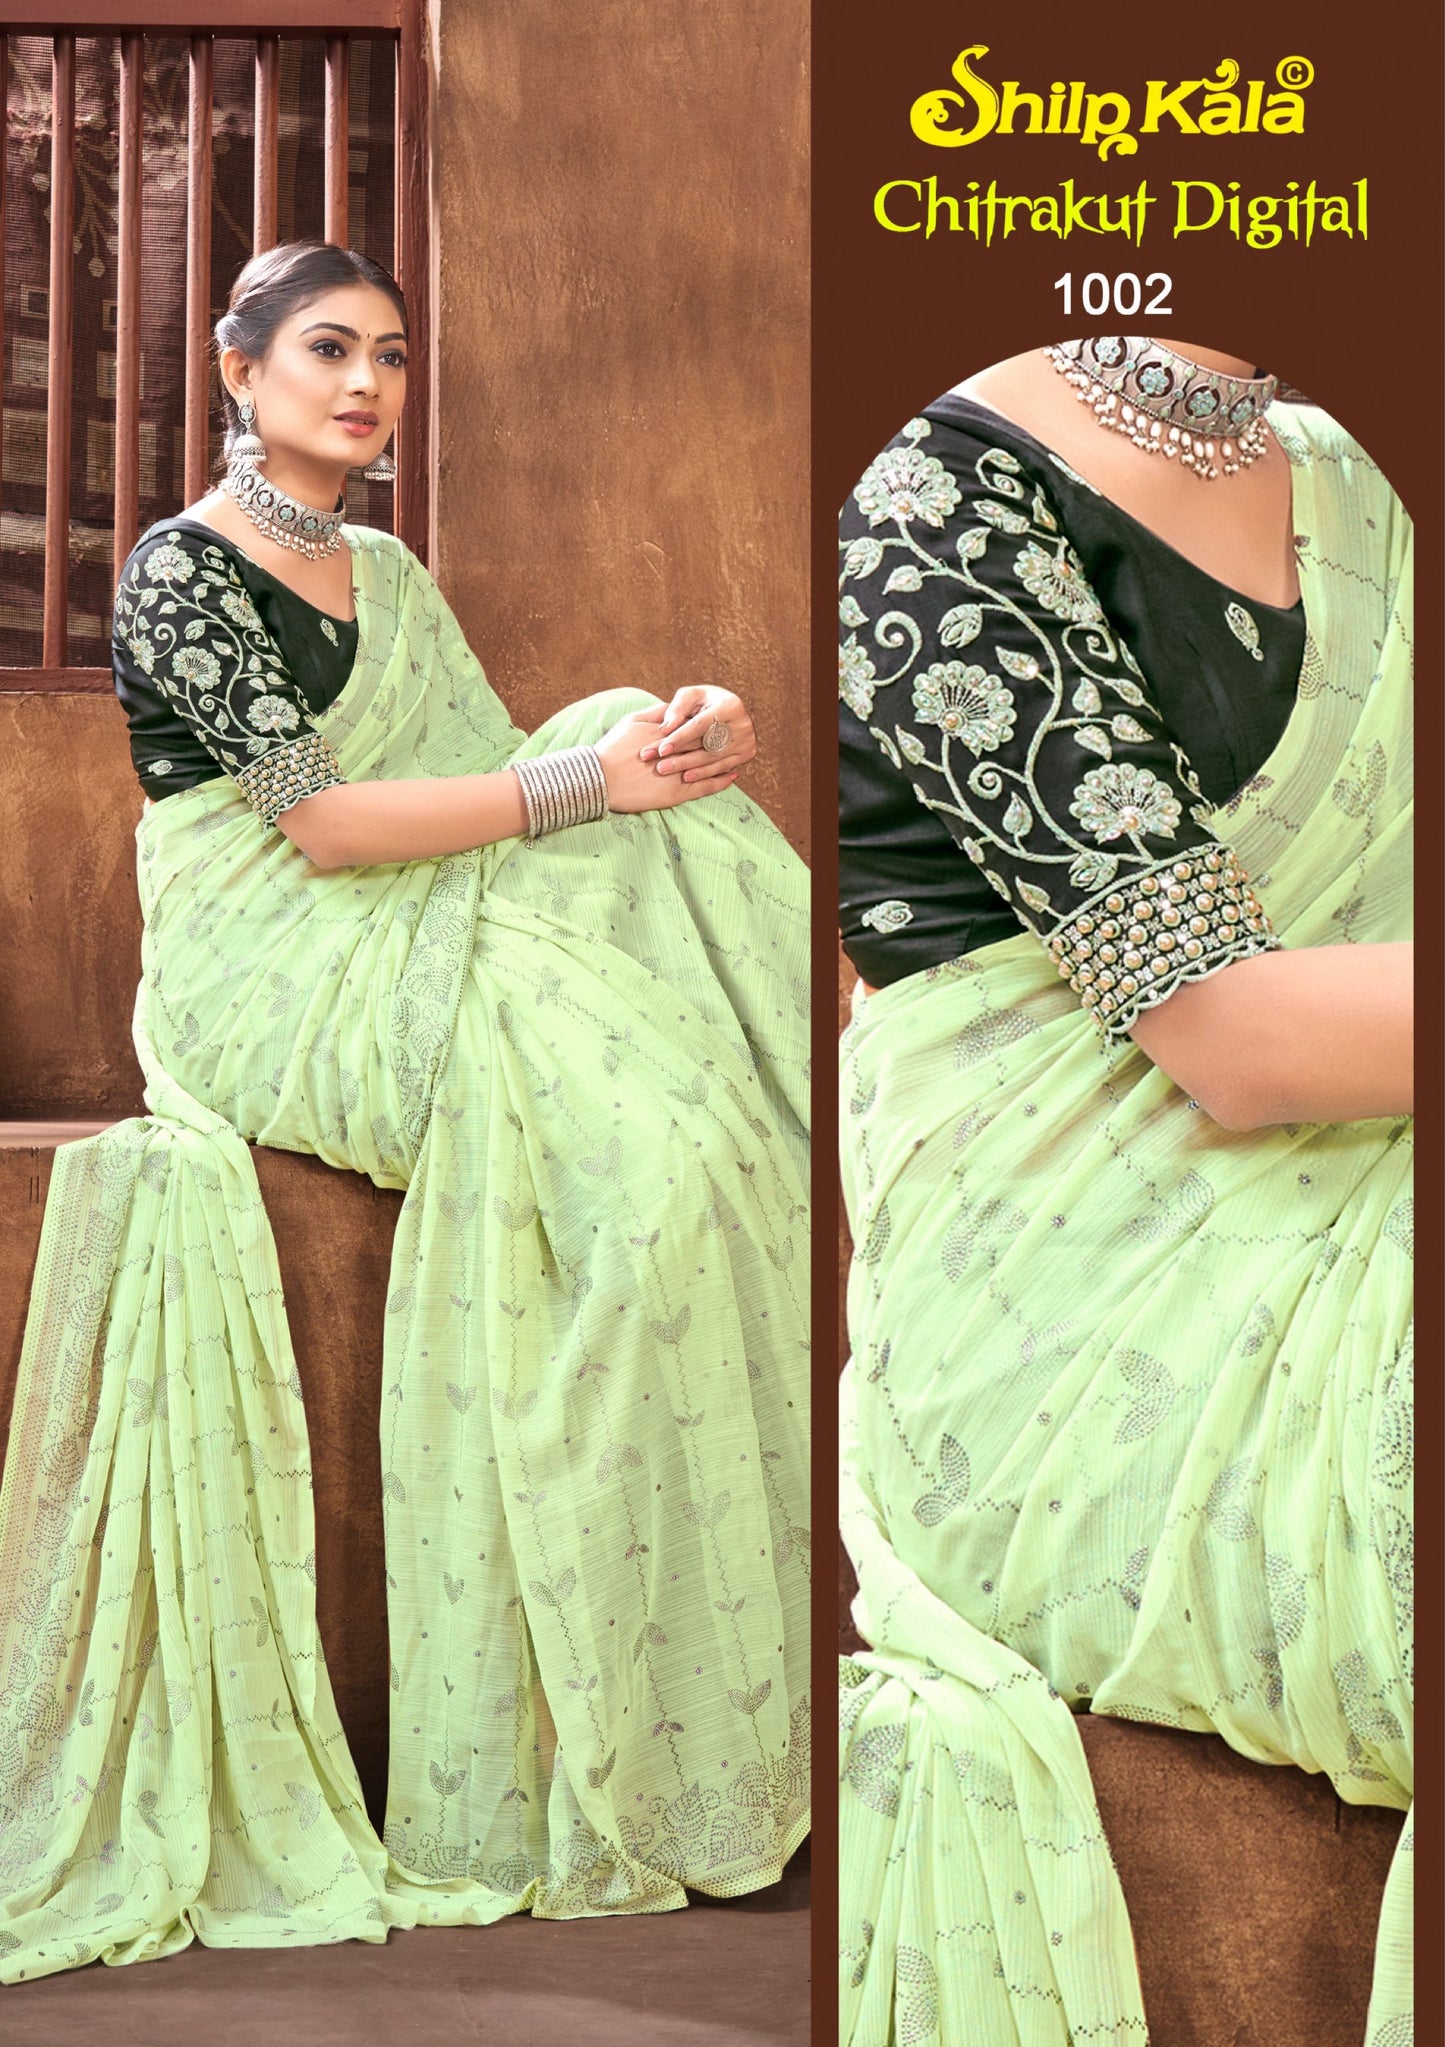 Chitrakut Mutliolor Chiffon Saree with Contrast Matching and Hand Word Blouse